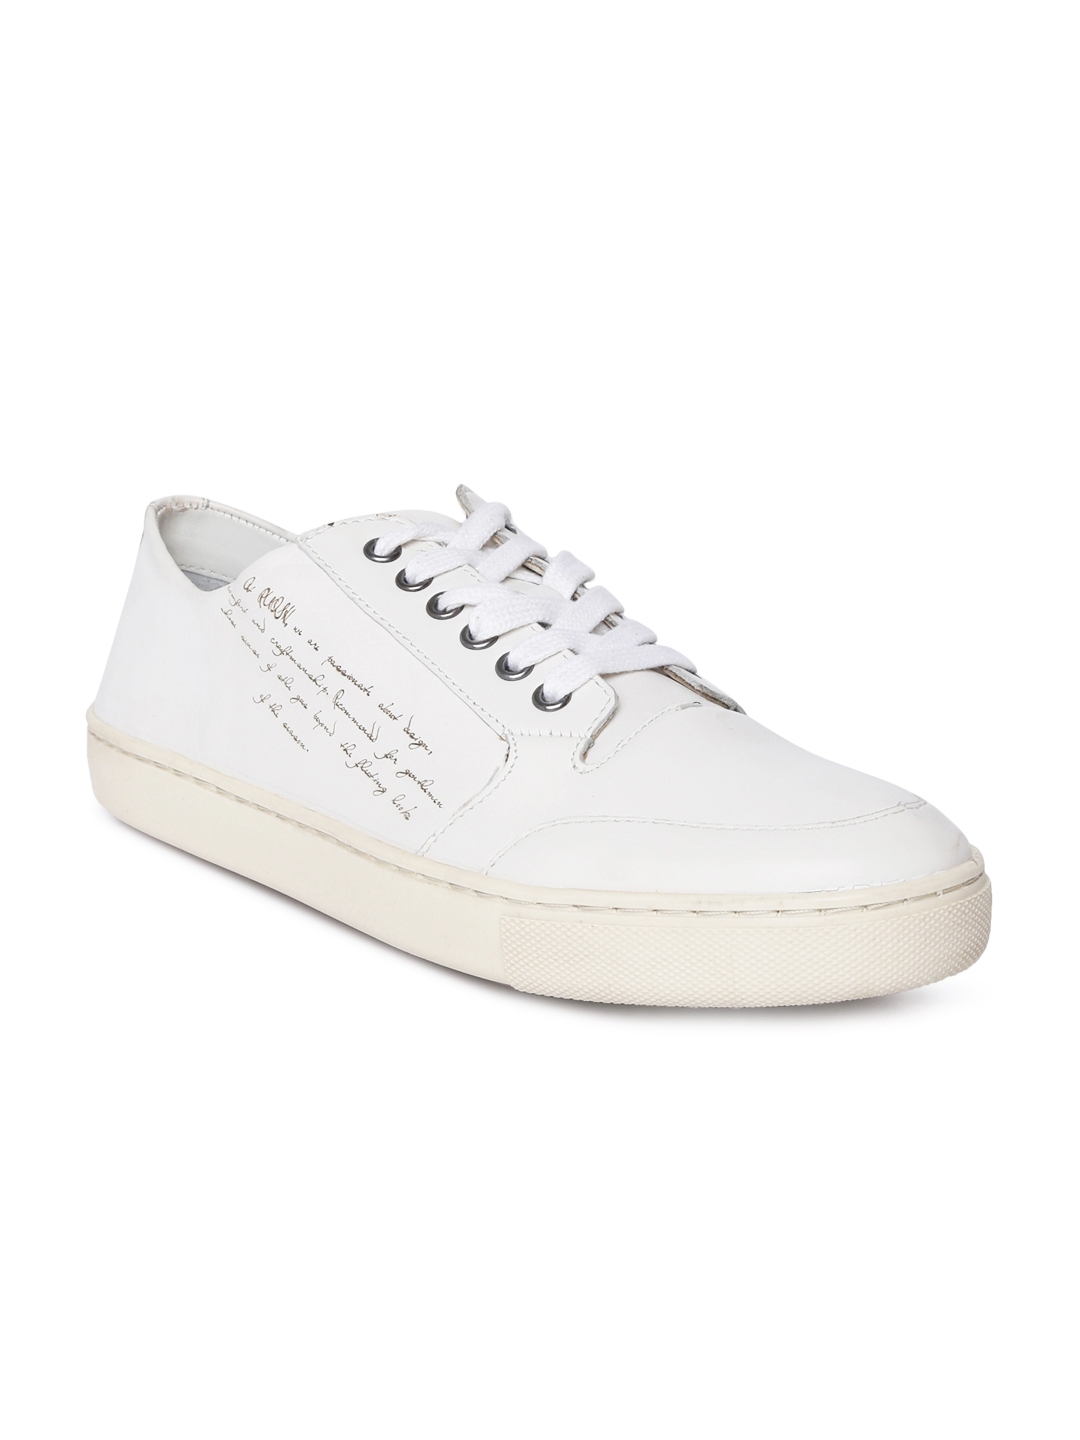 Ruosh Men White Sneakers - Casual Shoes 